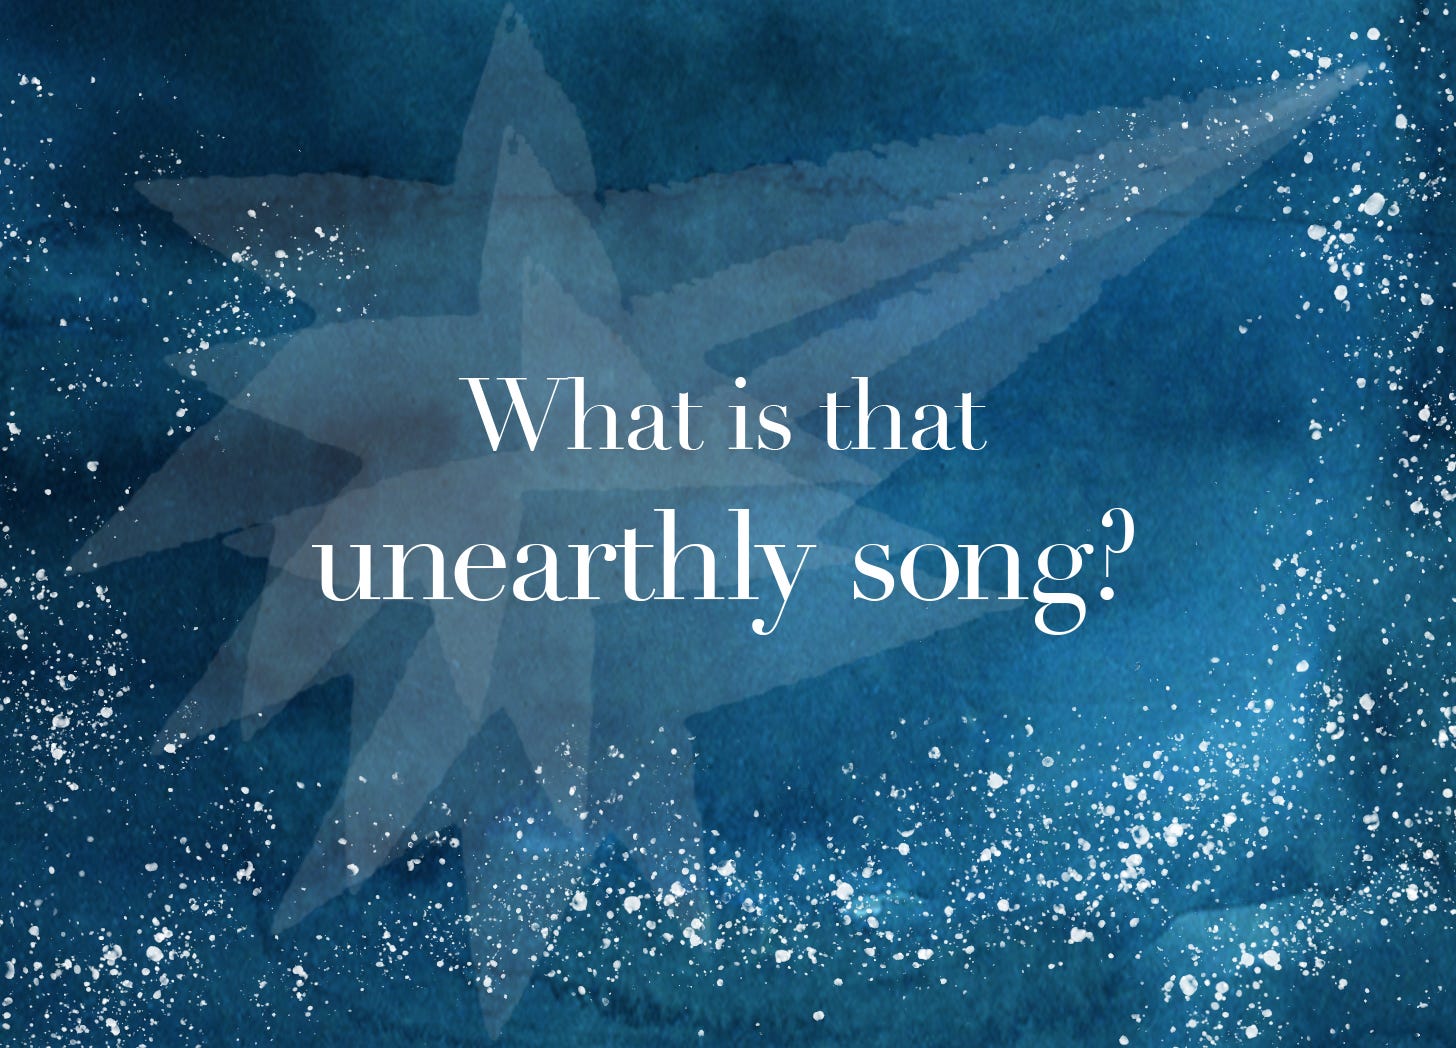 What is that unearthly song?